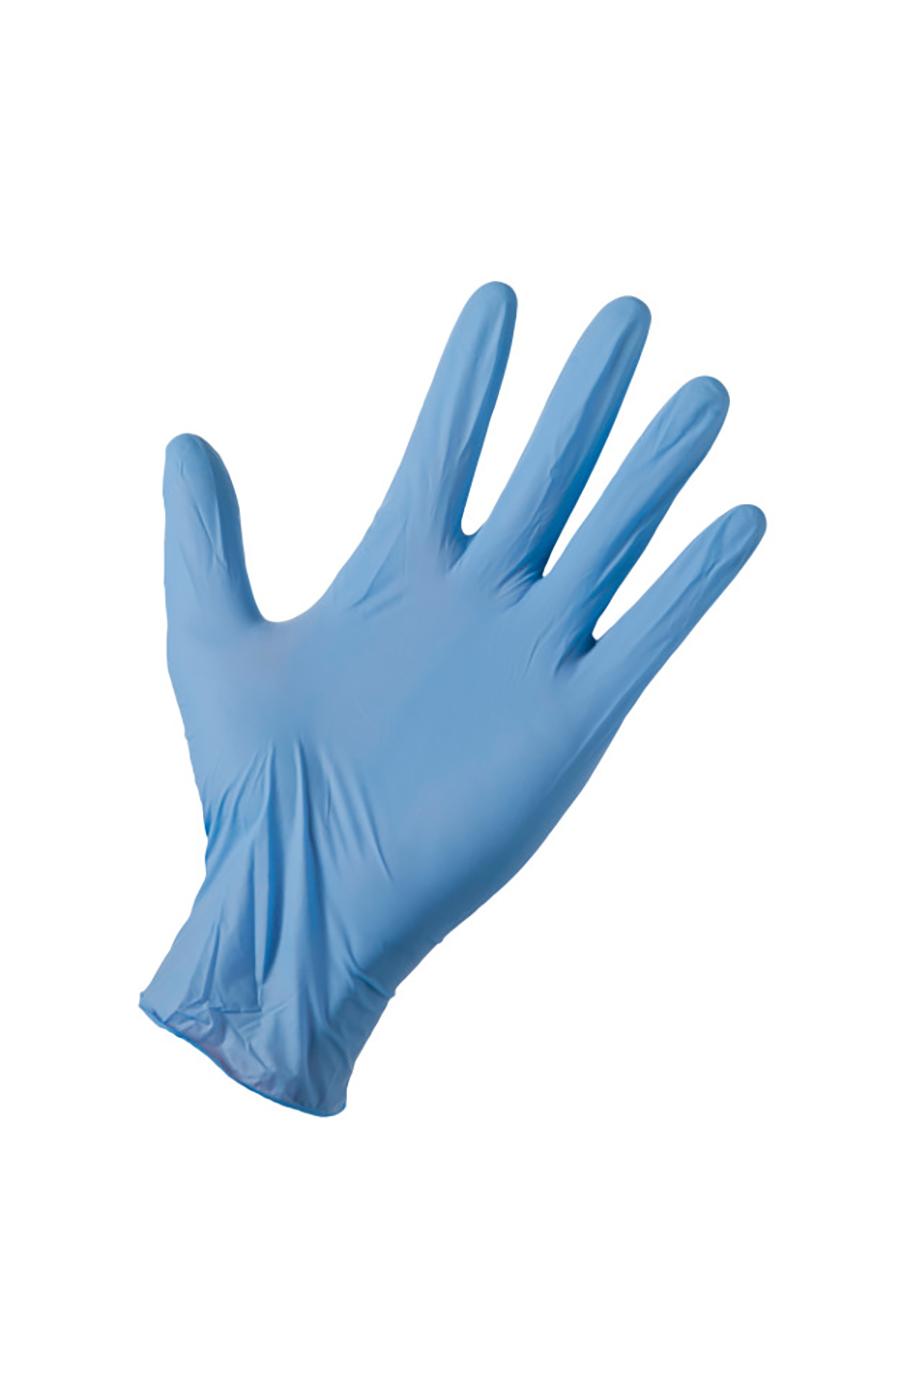 Soft Scrub Disposable Nitrile Gloves; image 2 of 2